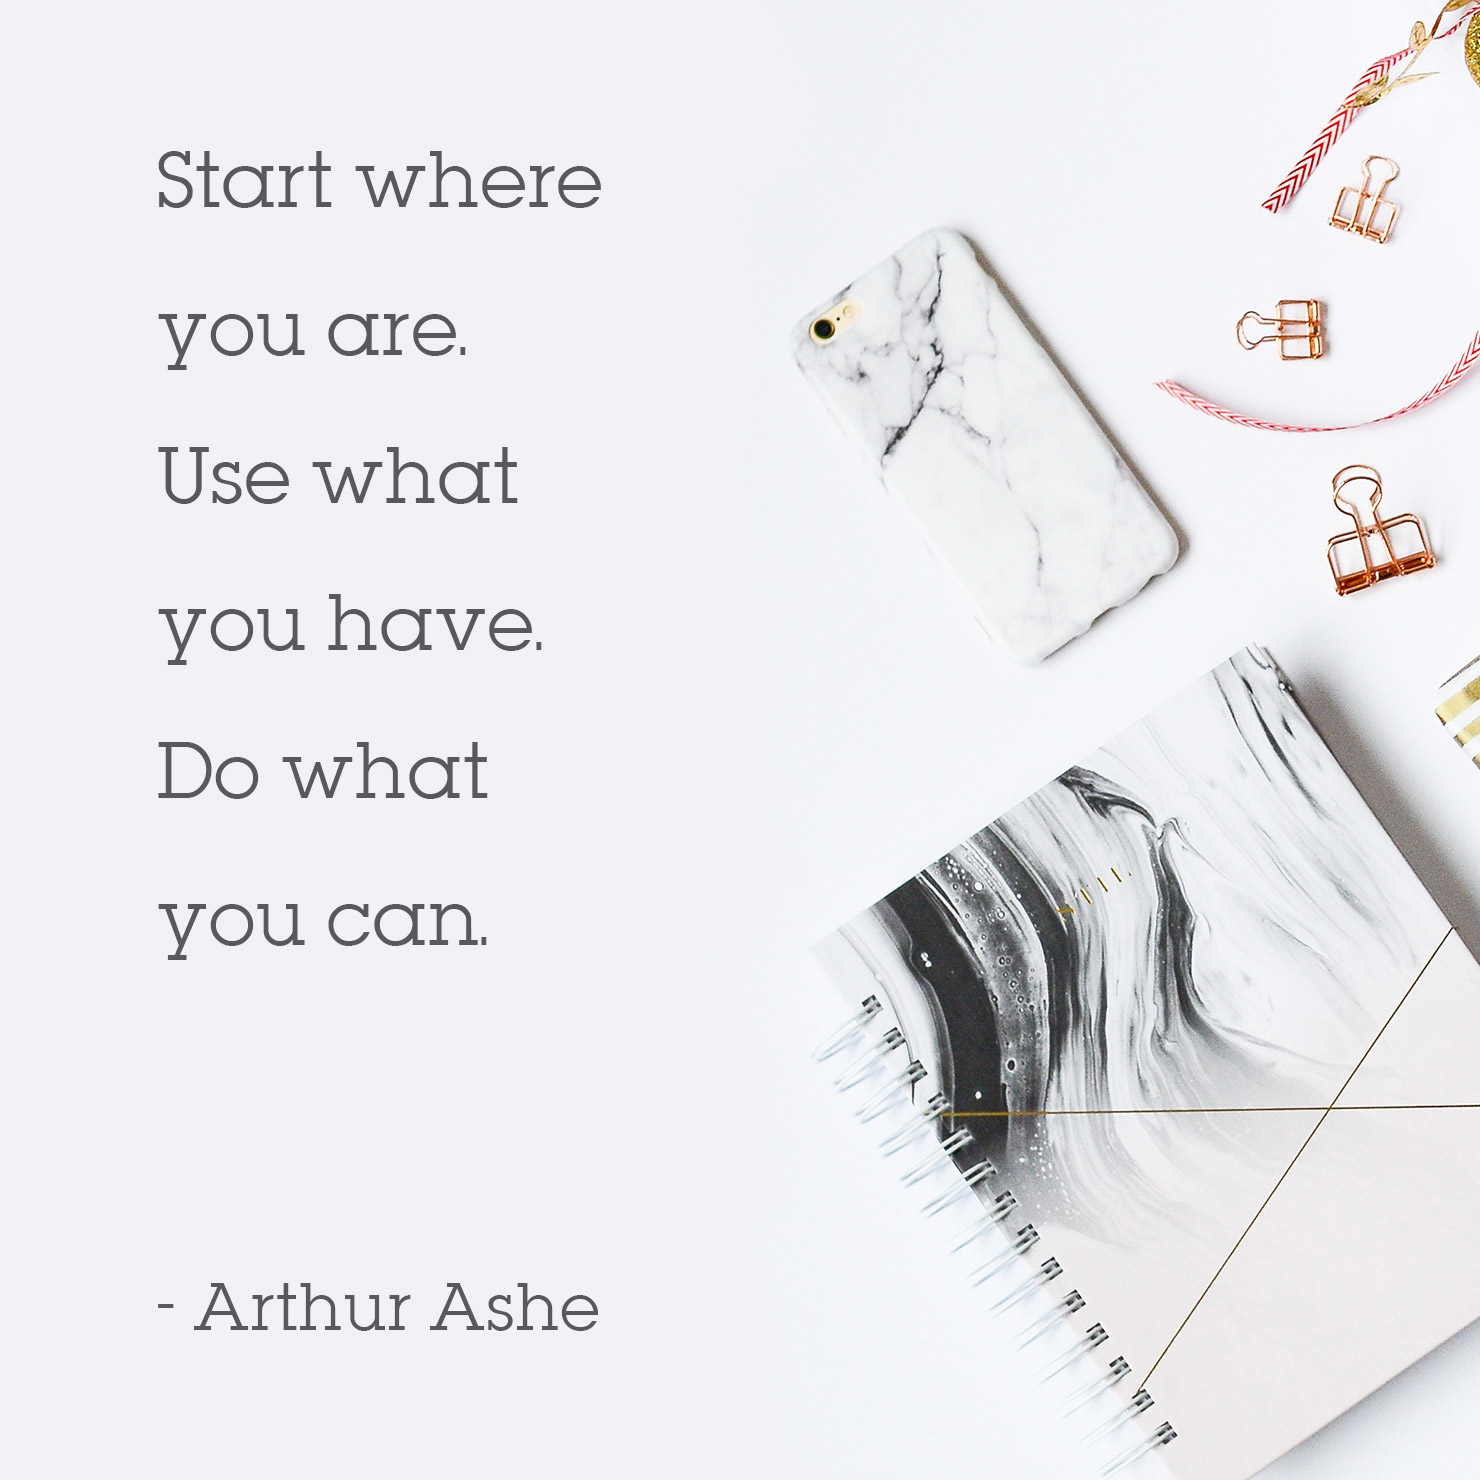 high school graduation quote: Start where you are. use hwat you have. do what you can - Arthur Ashe